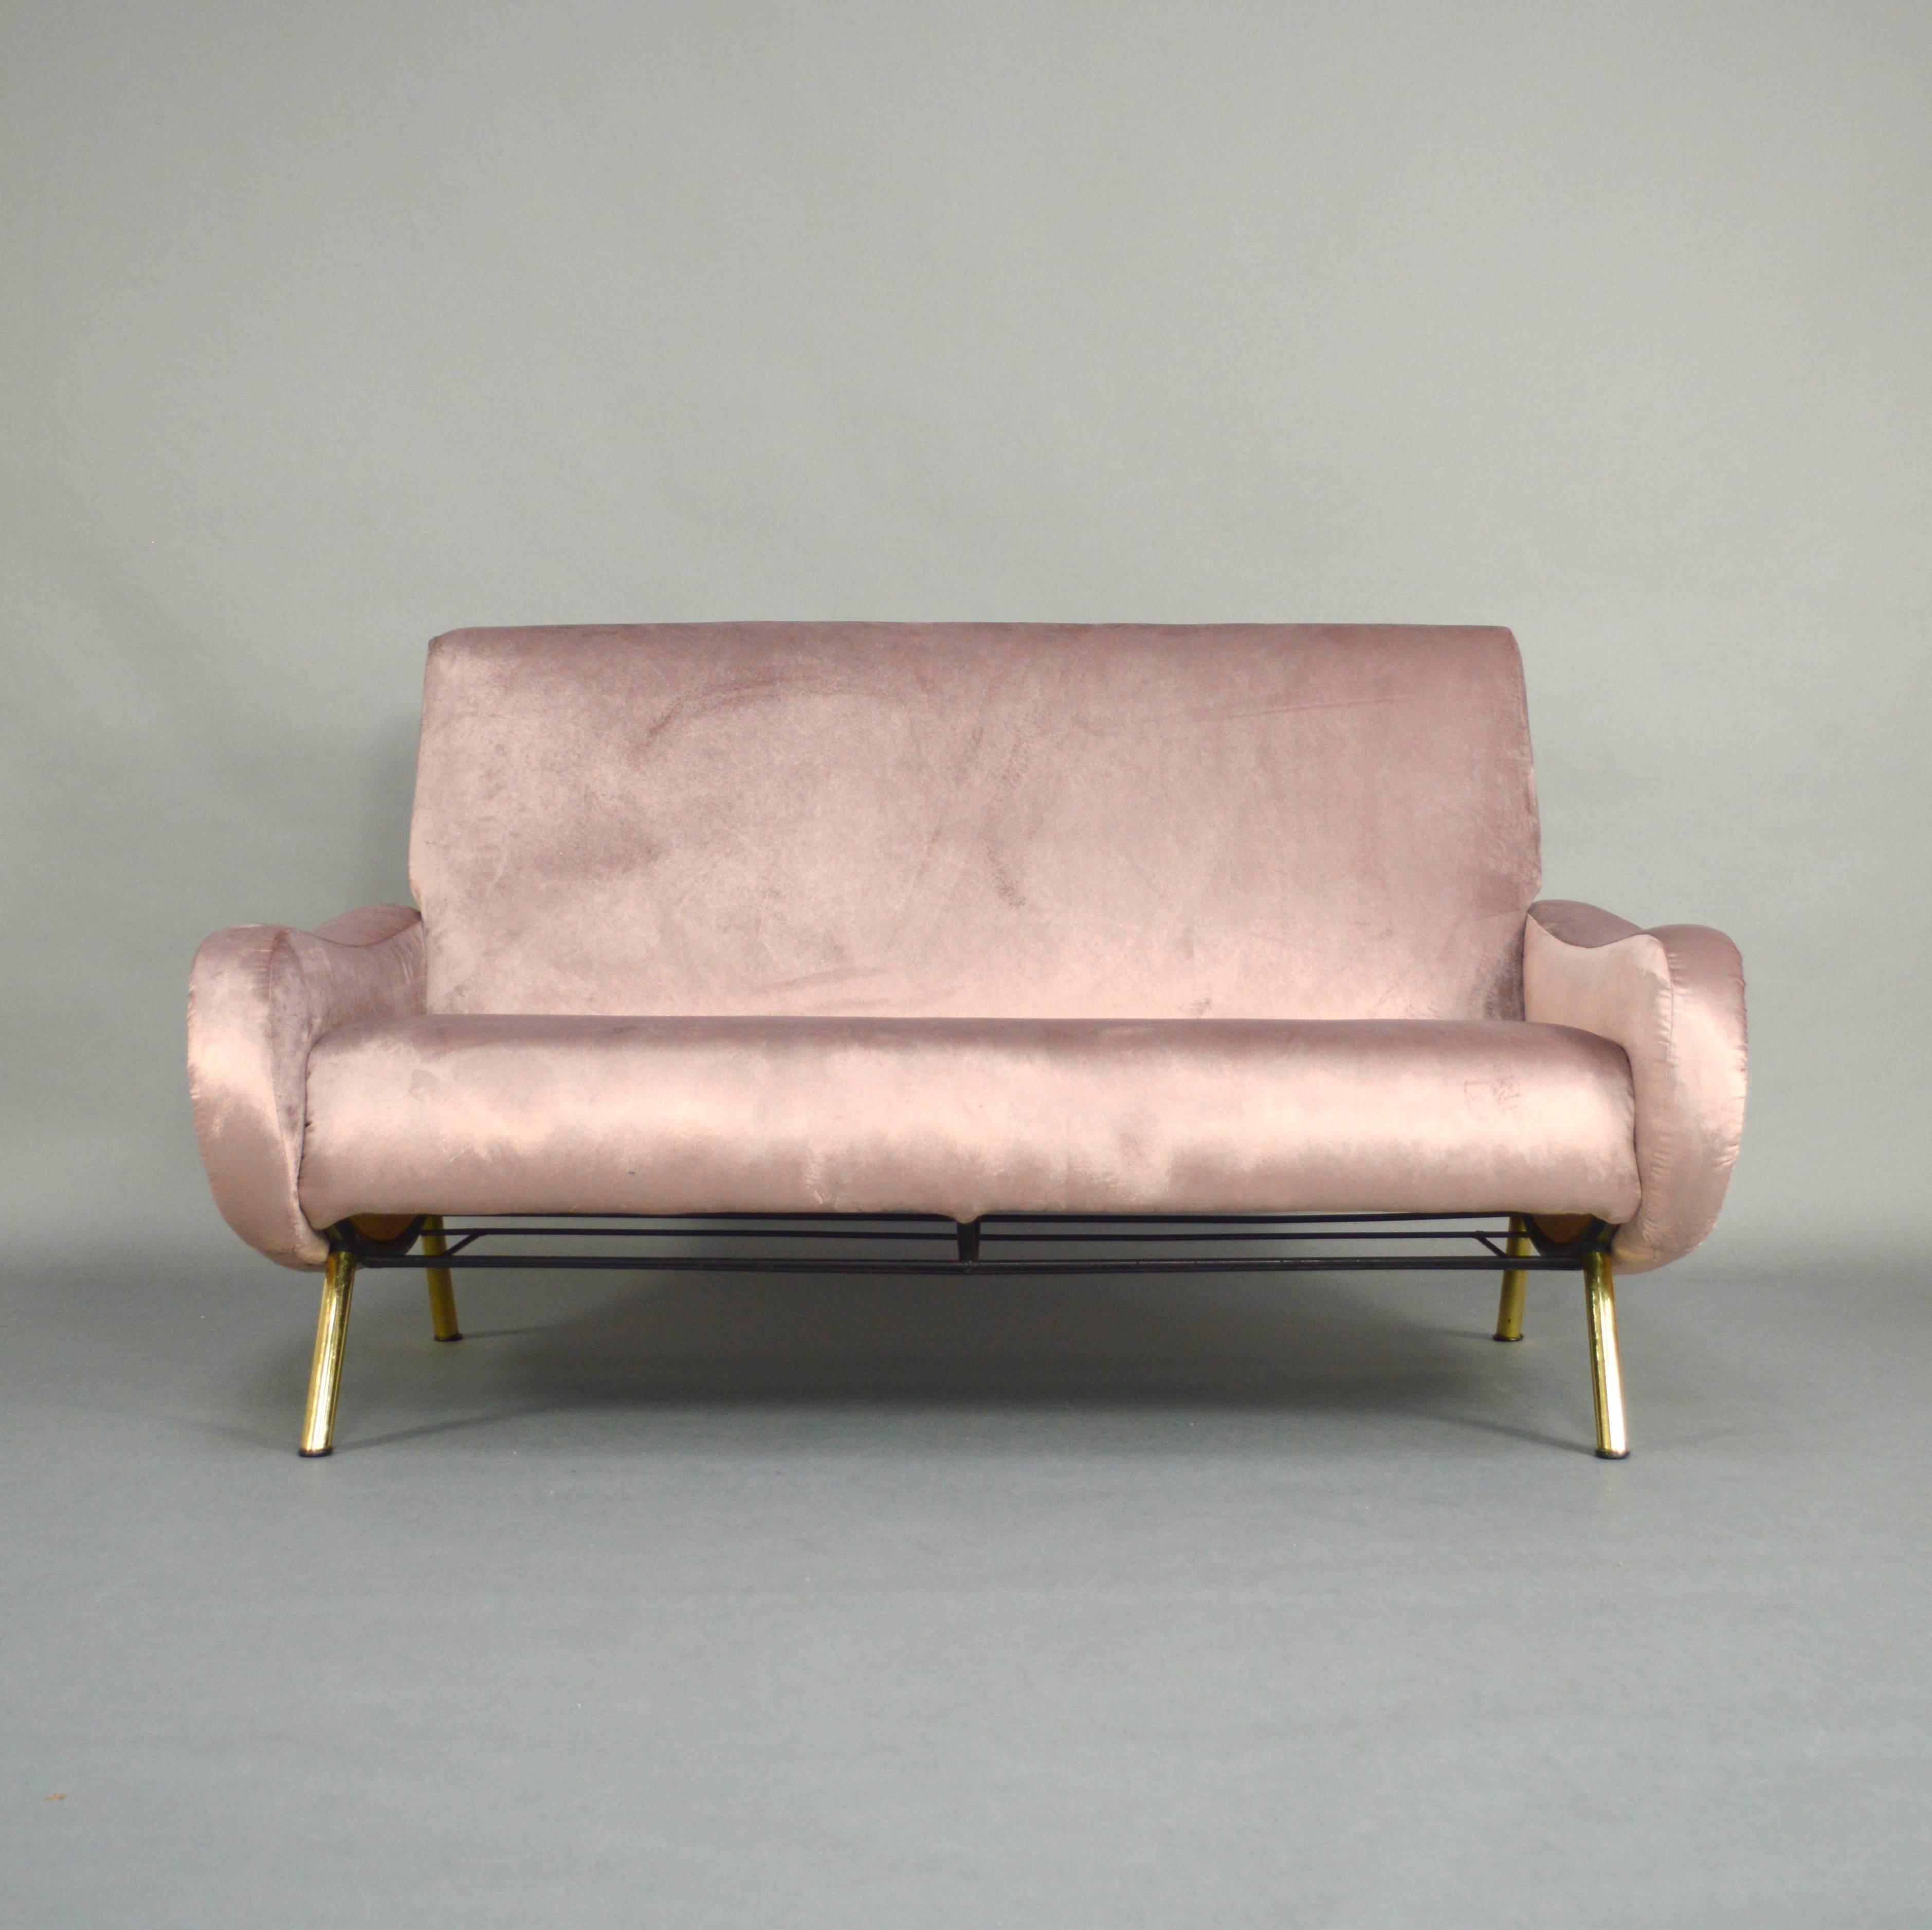 Marco Zanuso lady sofa for Arflex, Italy, 1950s.
Rare and absolutely gorgeous model with the rare brass legs.
The sofa has been completely reupholstered with new foam filling and a beautiful Classic but modern pink velvet fabric. Also available in